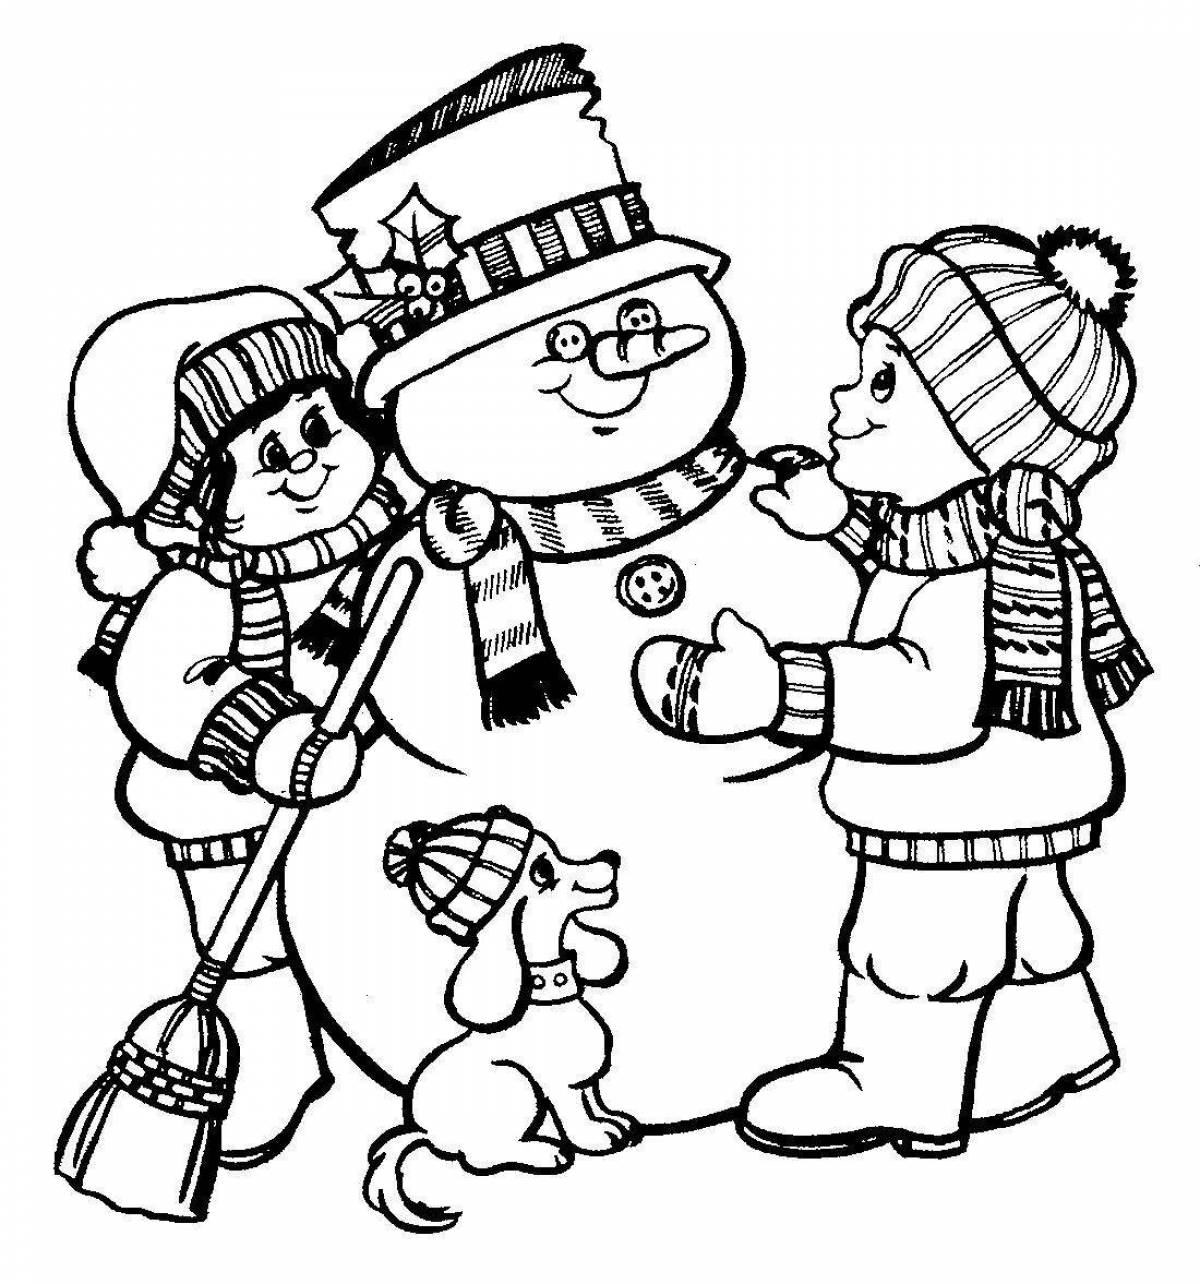 Coloring page charming winter wonderland